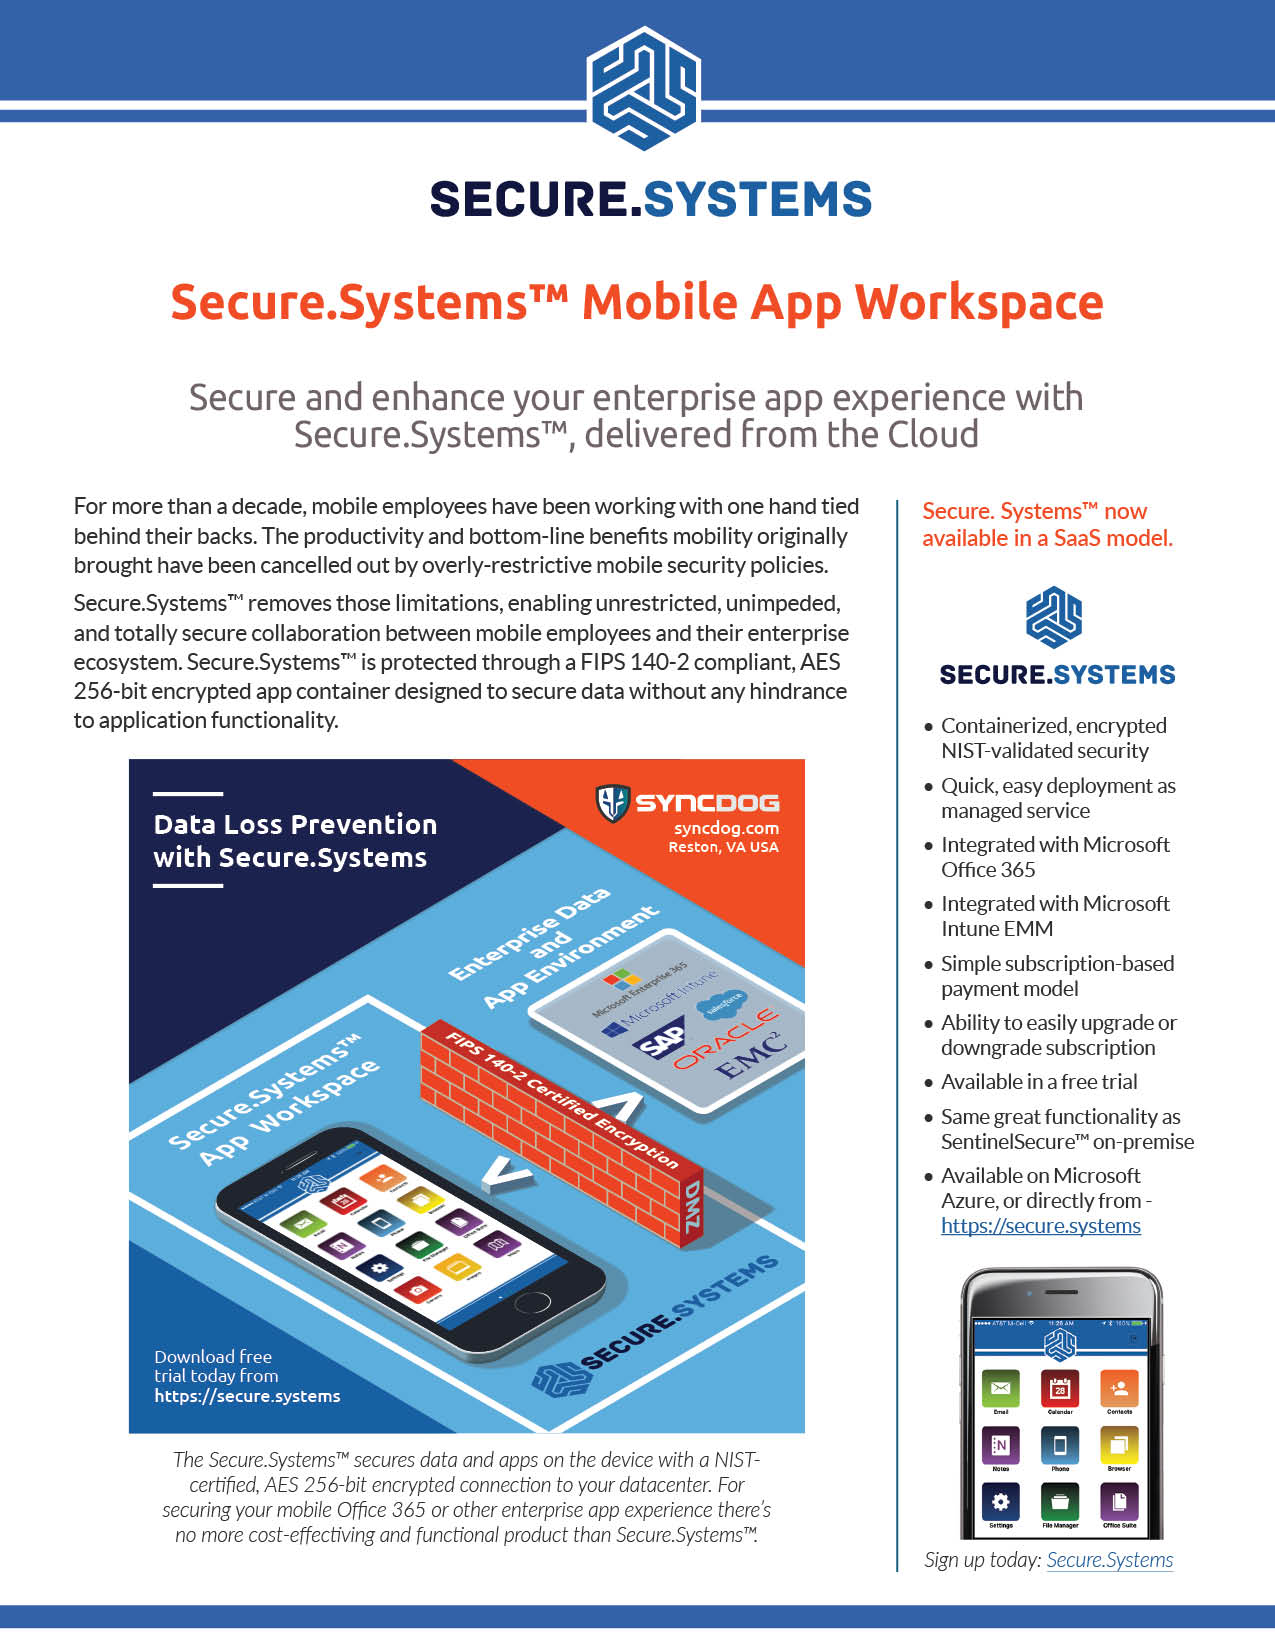 Secure.Systems Mobile App Work space